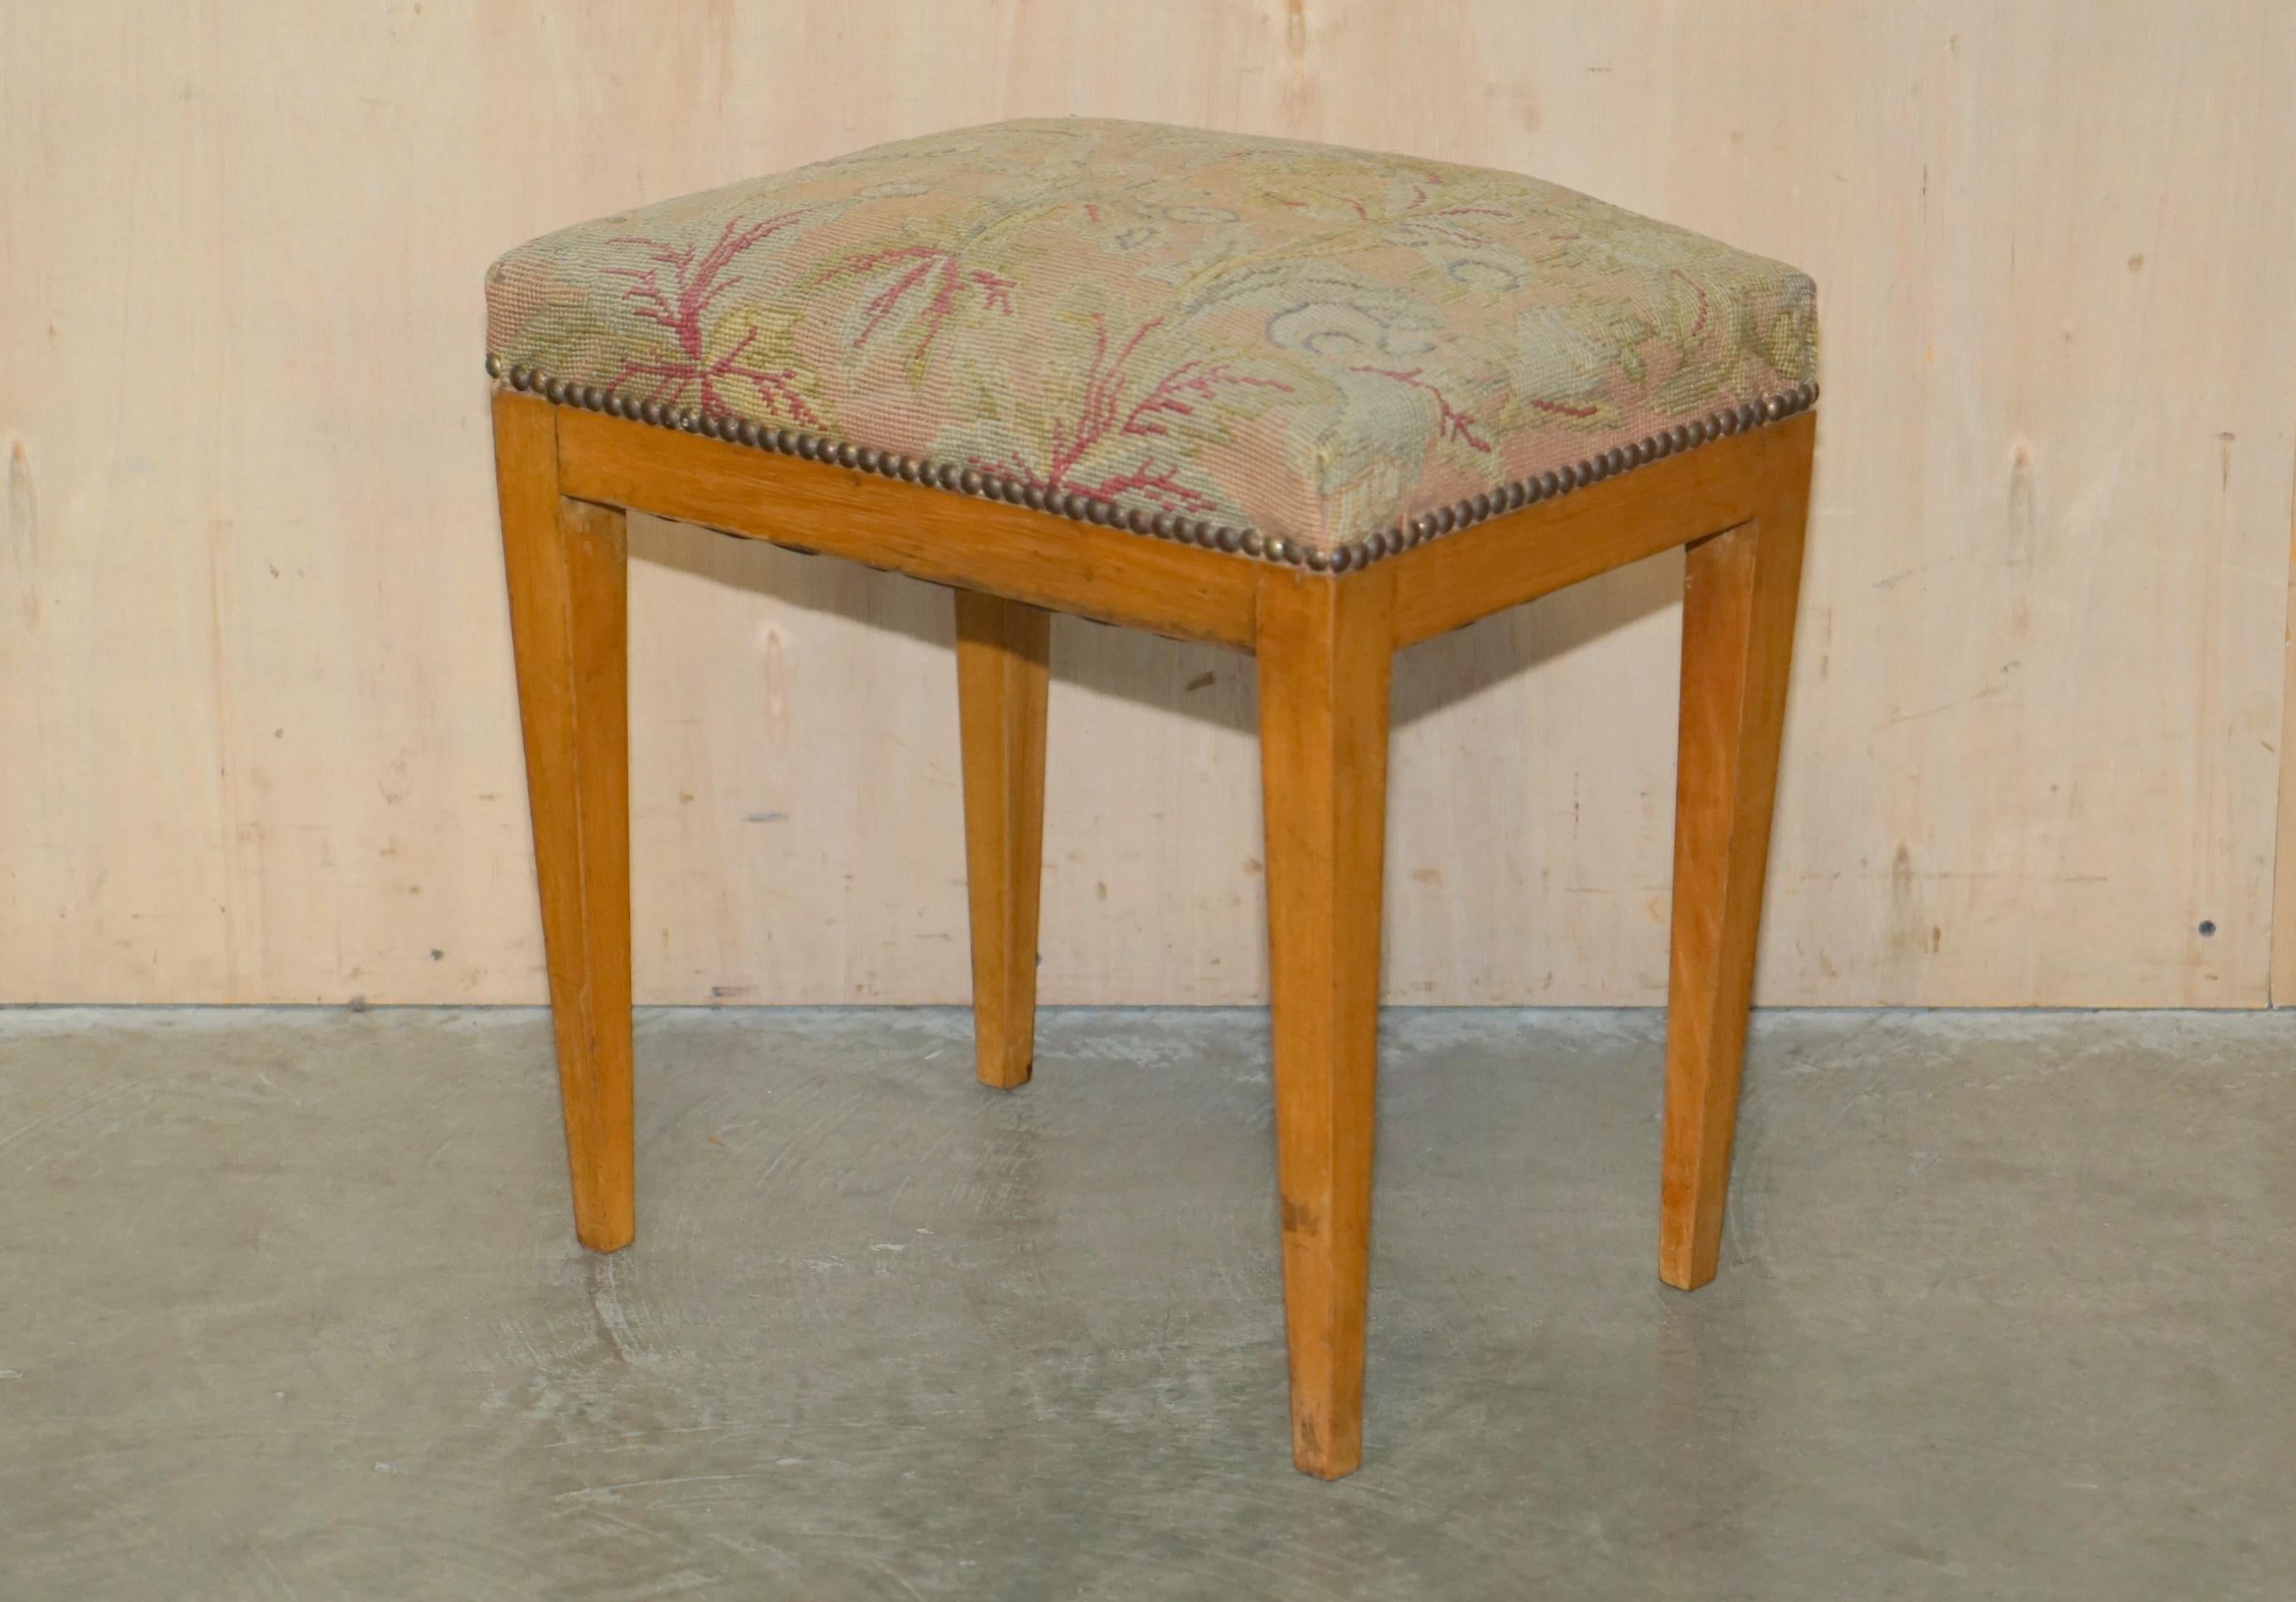 Royal House Antiques

Royal House Antiques is delighted to offer for sale this lovely antique circa 1880 Walnut Swedish Biedermier dressing table stool

Please note the delivery fee listed is just a guide, it covers within the M25 only for the UK